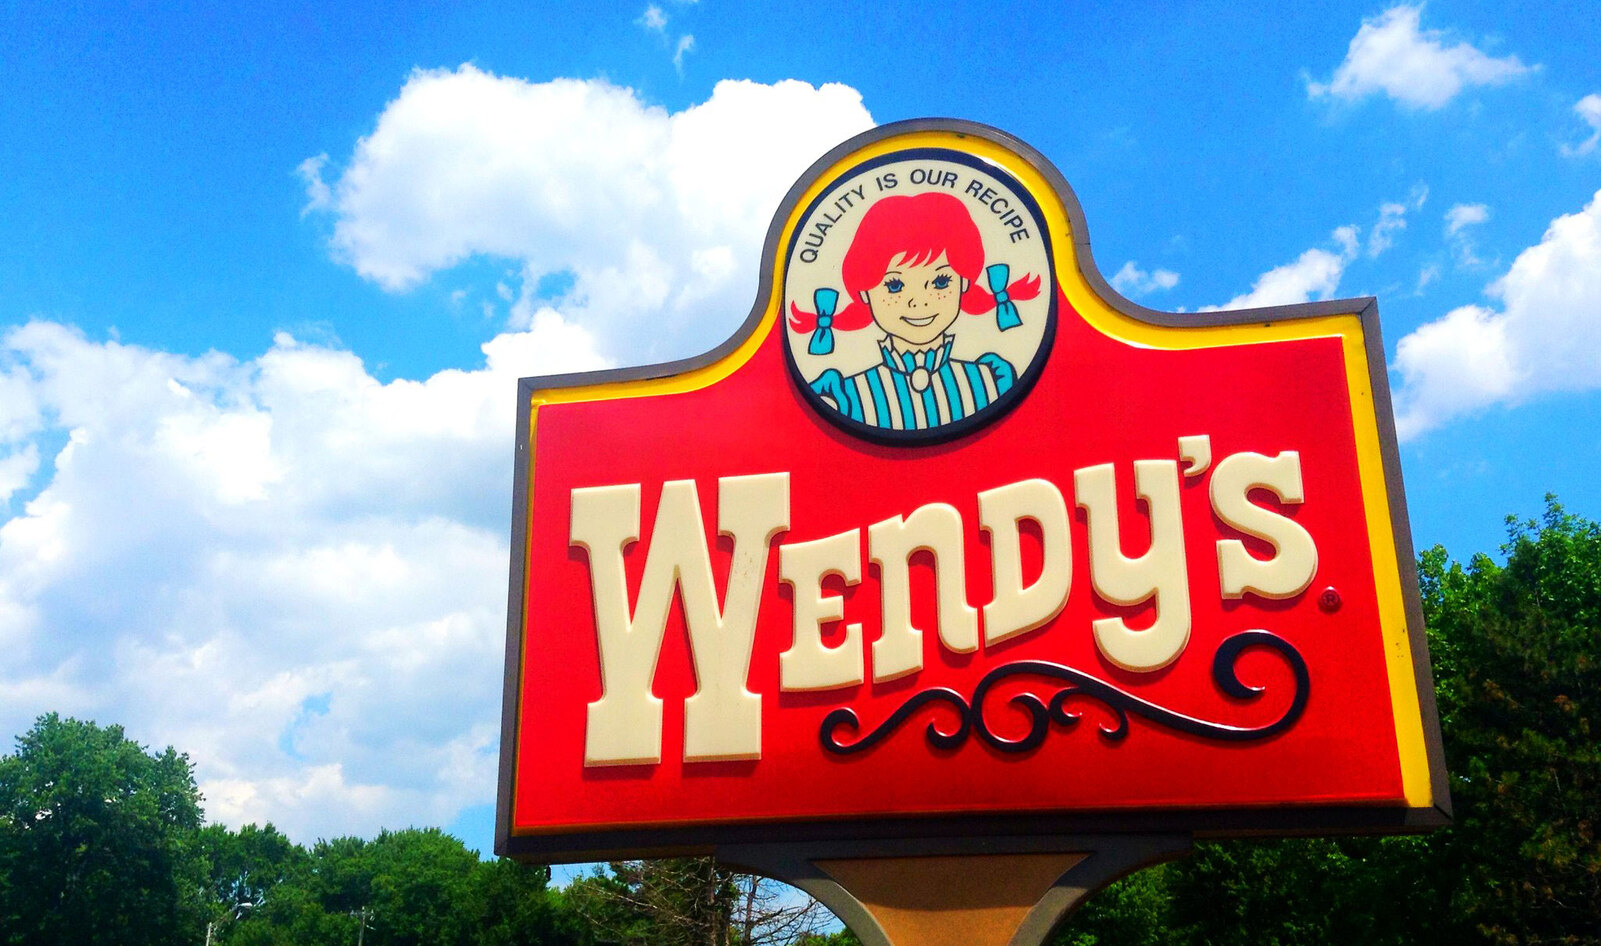 Wendy’s Begins Removing Beef from Menu Amid Meat Shortages